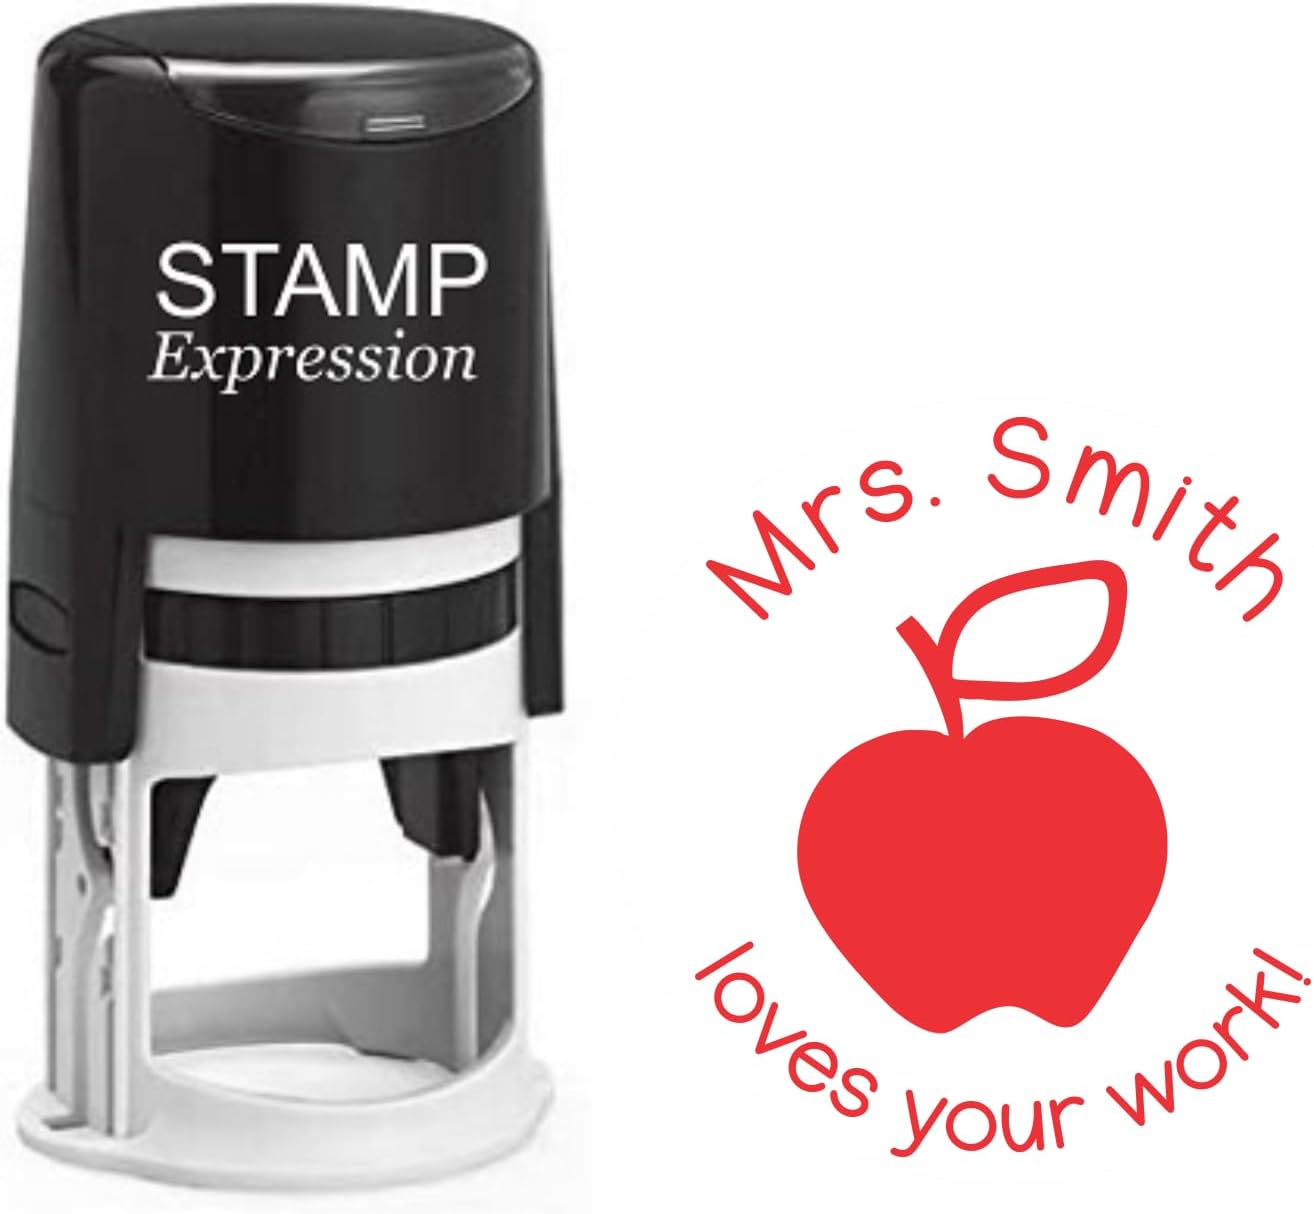 Loves Your Work with Apple Teacher Custom Stamp - Self Inking. Personalized Rubber Stamp with Lines of Text (SH-76209)